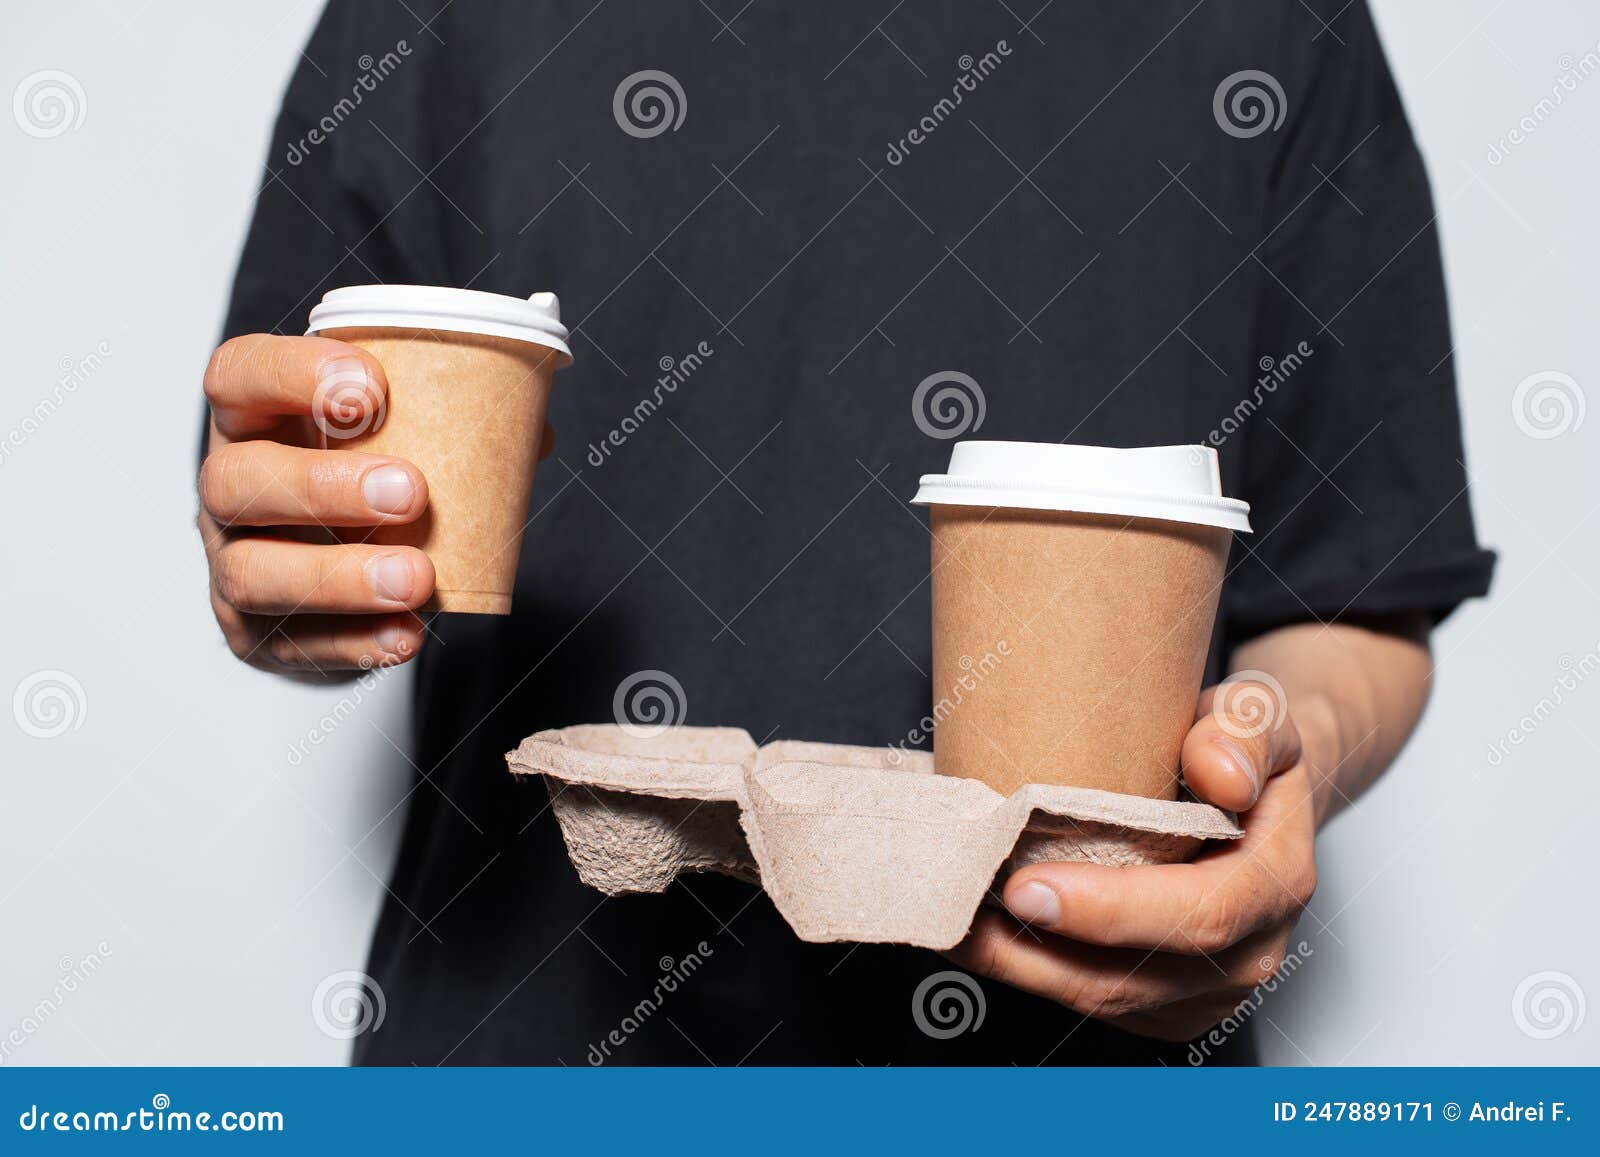 https://thumbs.dreamstime.com/z/close-up-male-hands-holding-paper-coffee-cup-holder-cups-takeaway-close-up-male-hands-holding-paper-coffee-cup-247889171.jpg